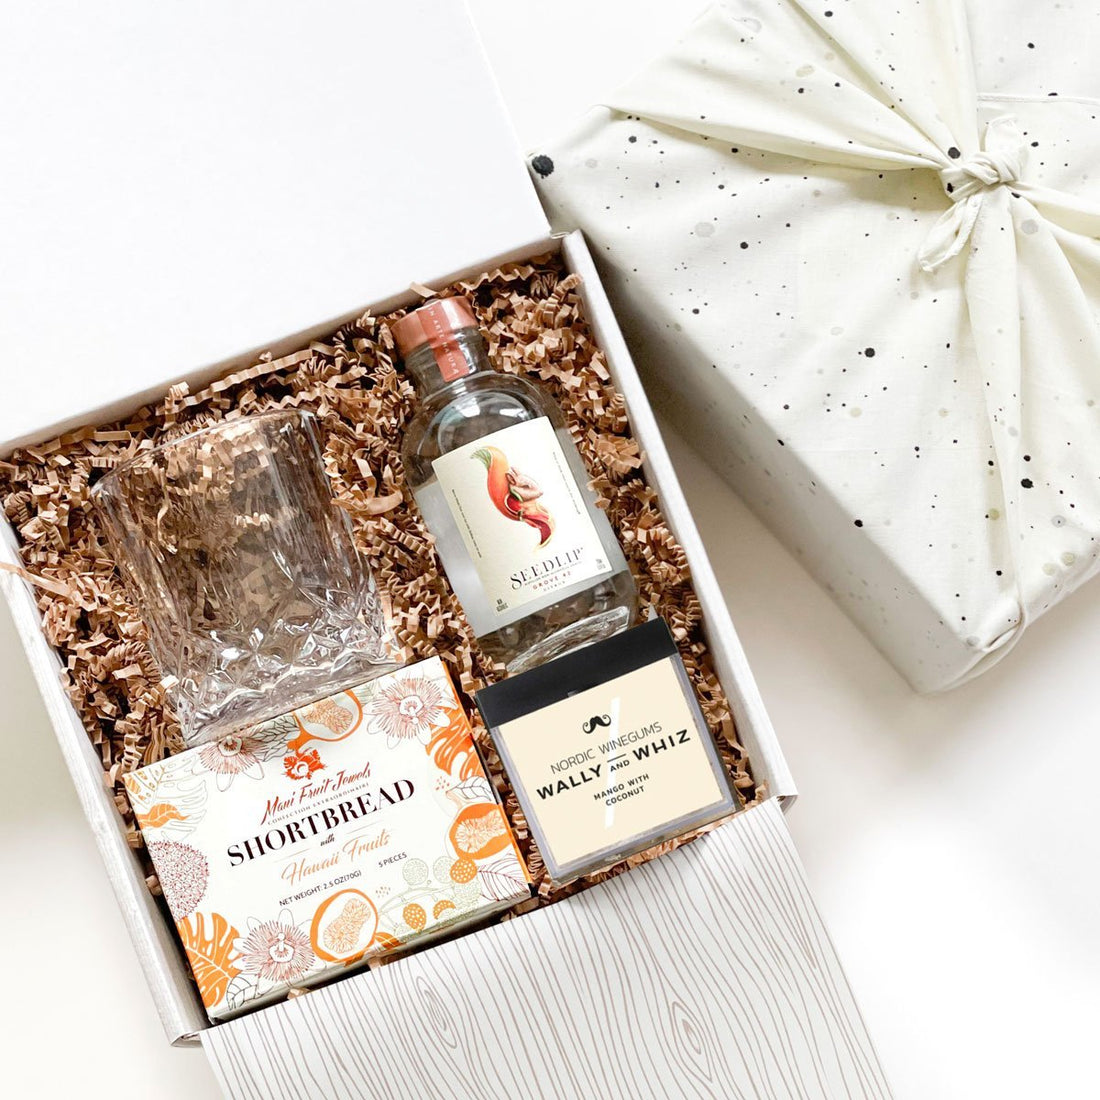 Father's day Cocktail Hour Curated Gifts with Seedlip drink, wally and whiz wine gum, viski whiskey glass and Maui fruit cookies.